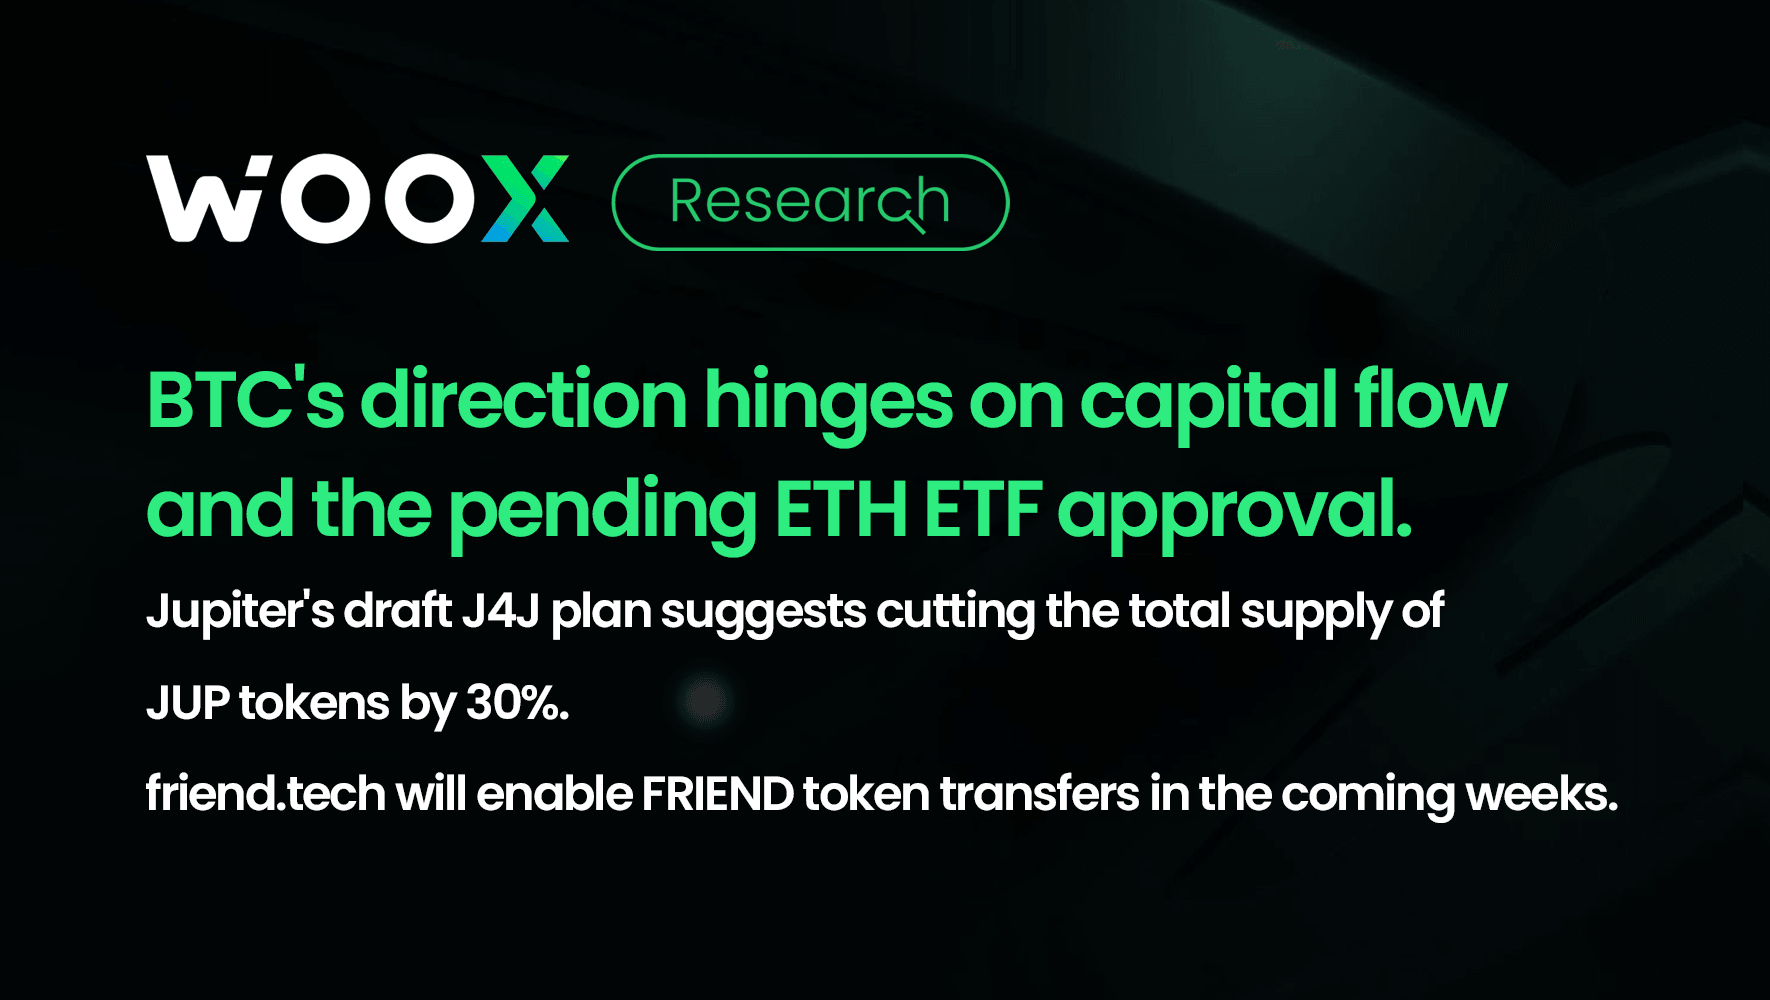 BTC's direction hinges on capital flow and the pending ETH ETF approval.